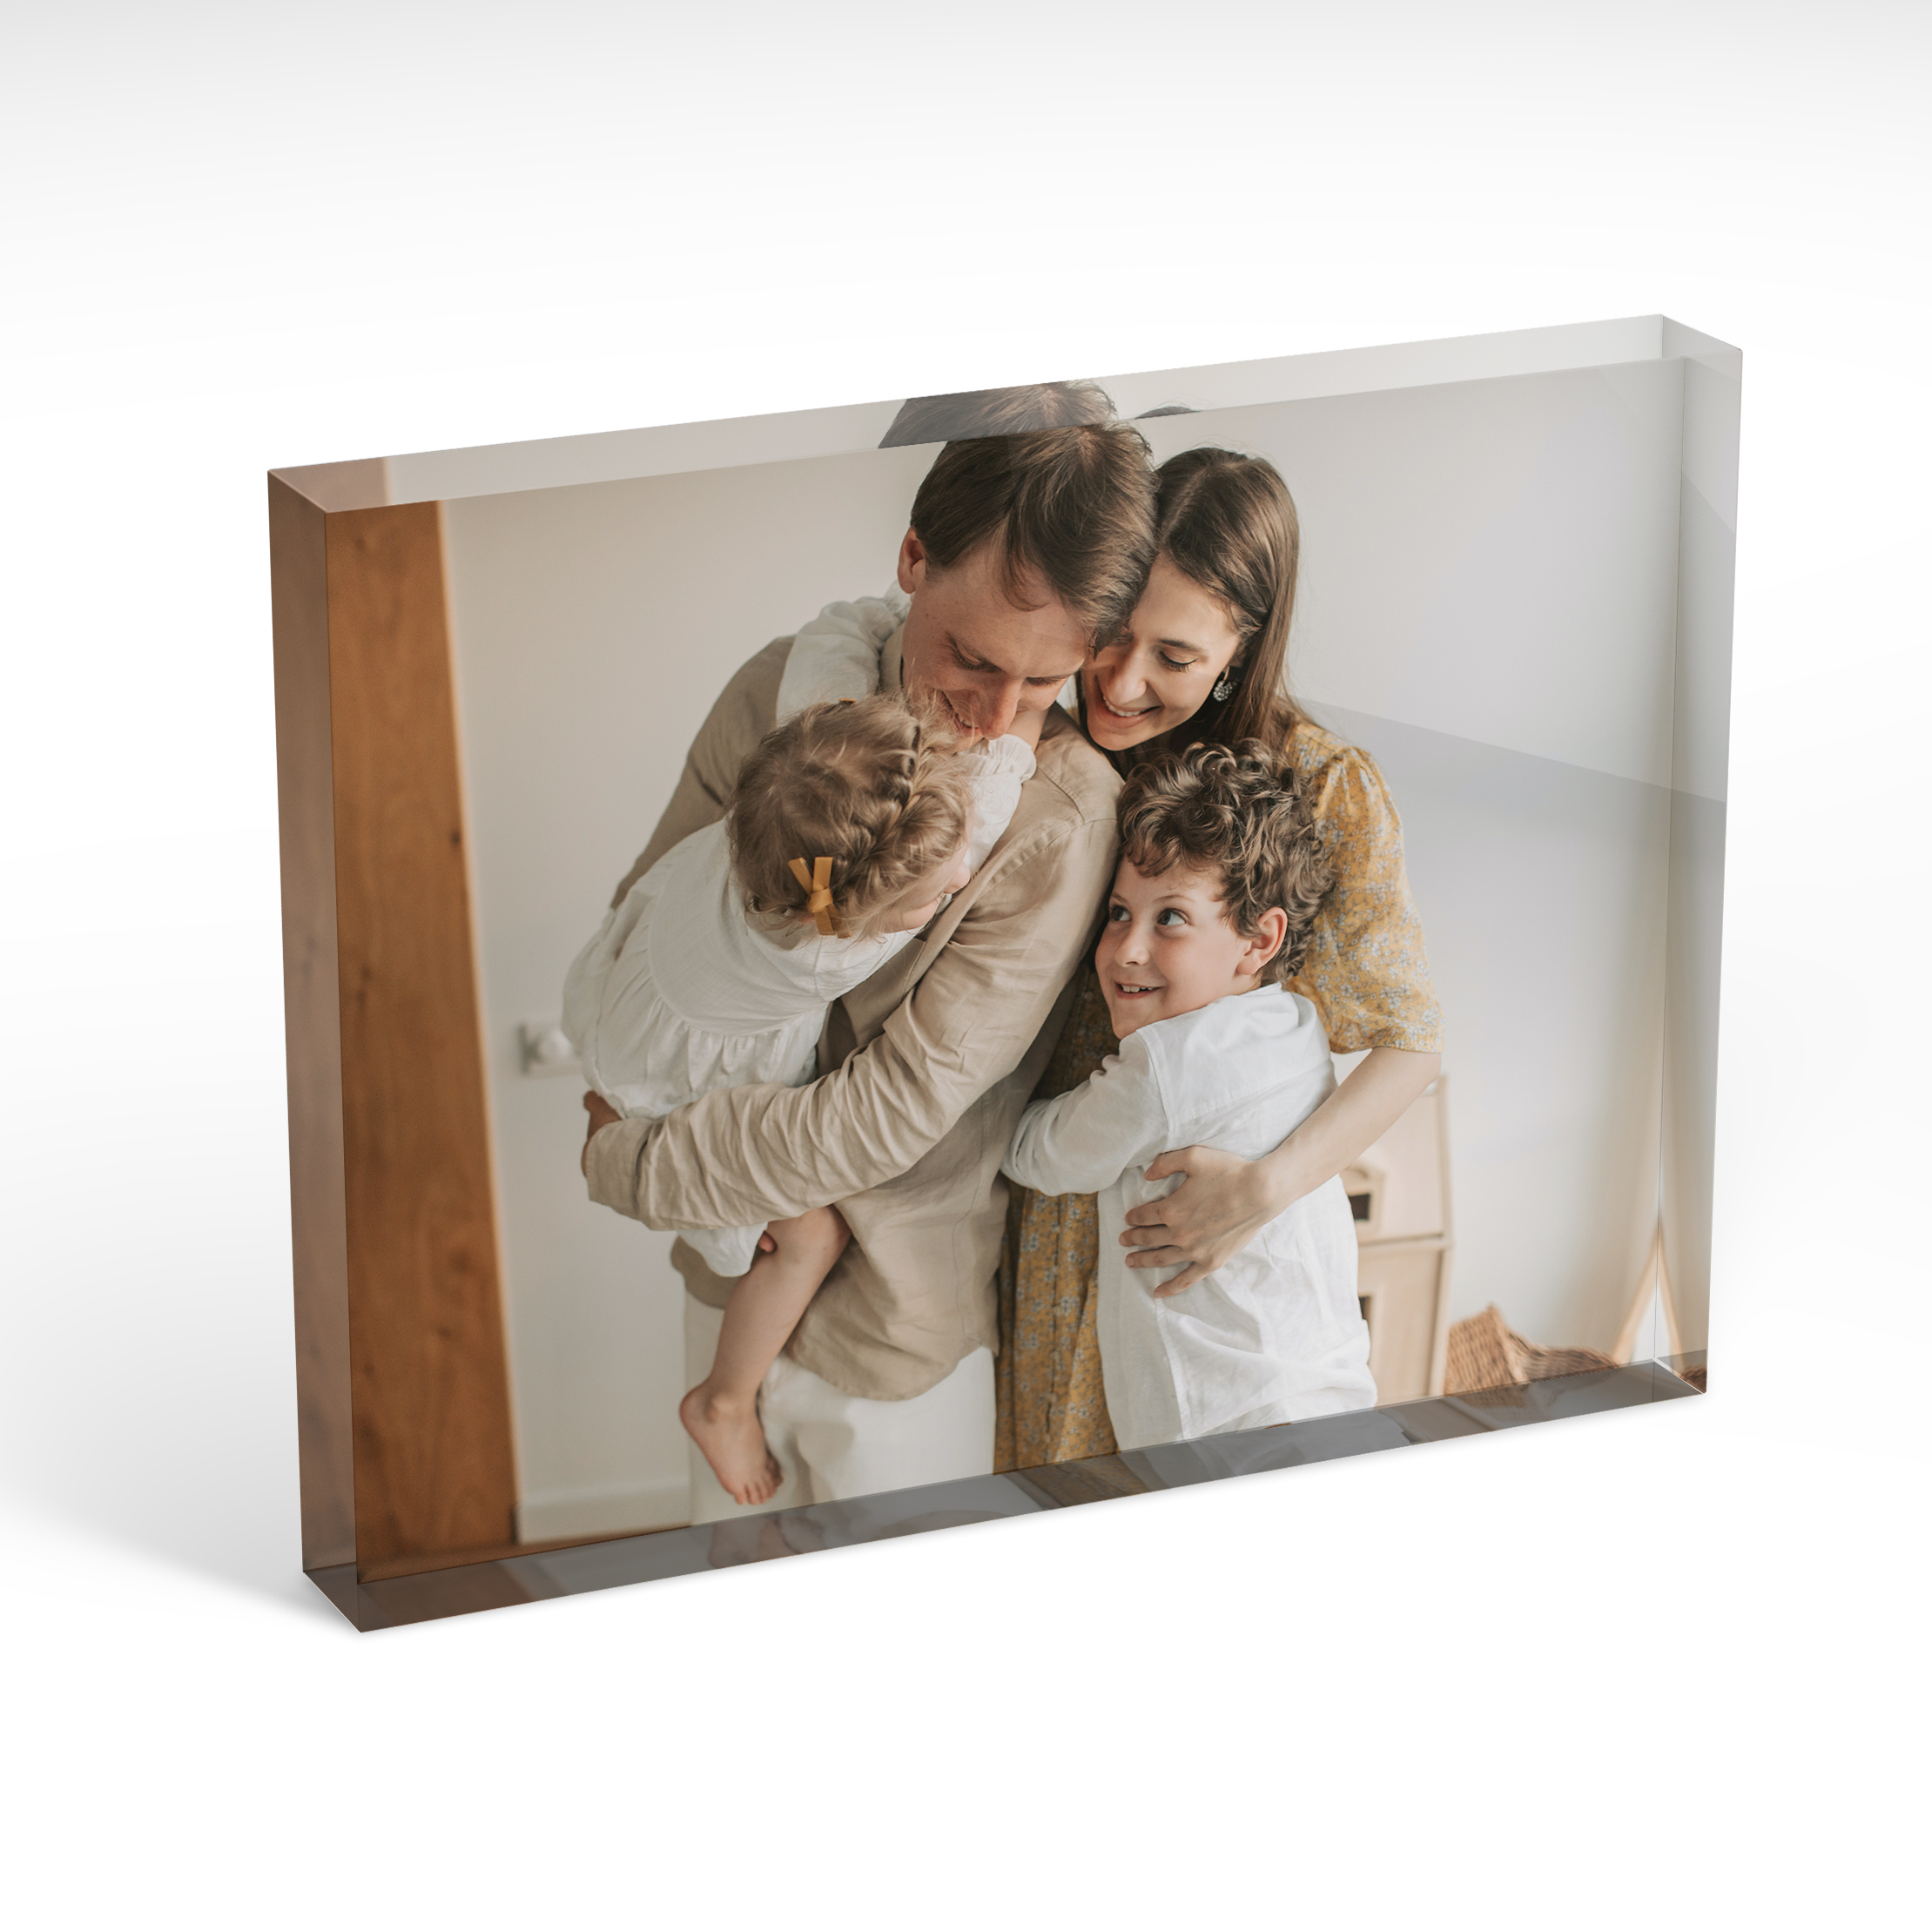 An angled side view of a landscape layout Perspex Photo Blocks with space for 1 photo. Thiis design is named "Simple Landscape". 